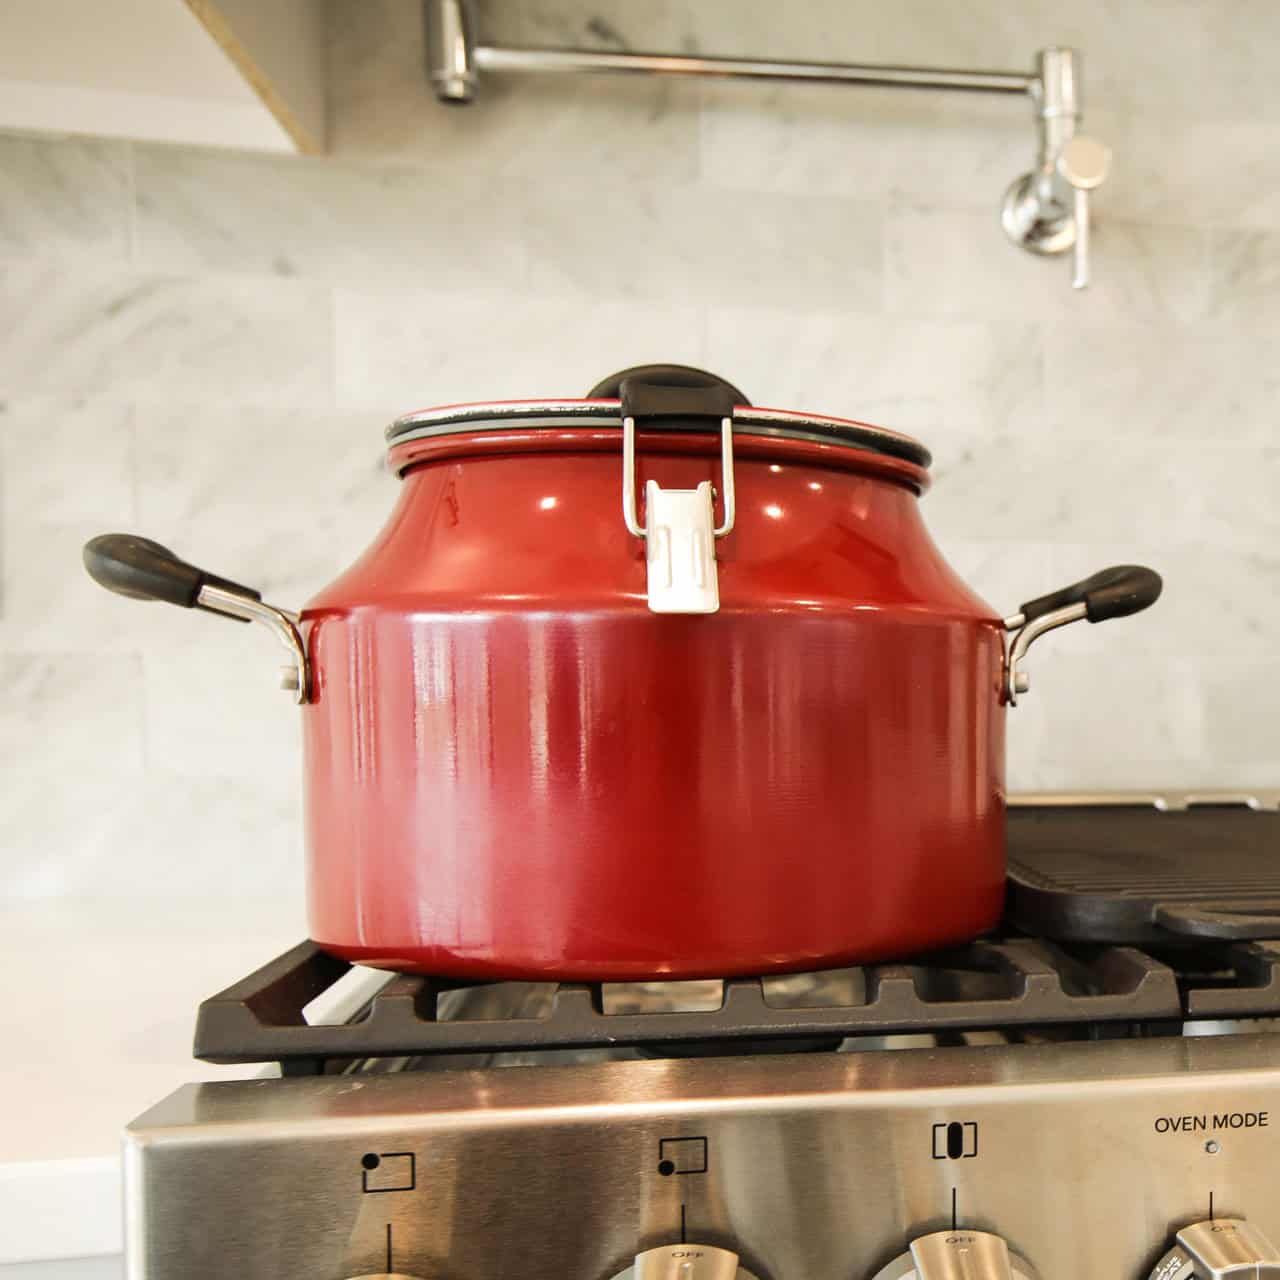 https://www.cancooker.com/wp-content/uploads/2020/10/products-Signature_Series_Resize_9__25916.1603200178.1280.1280.jpg